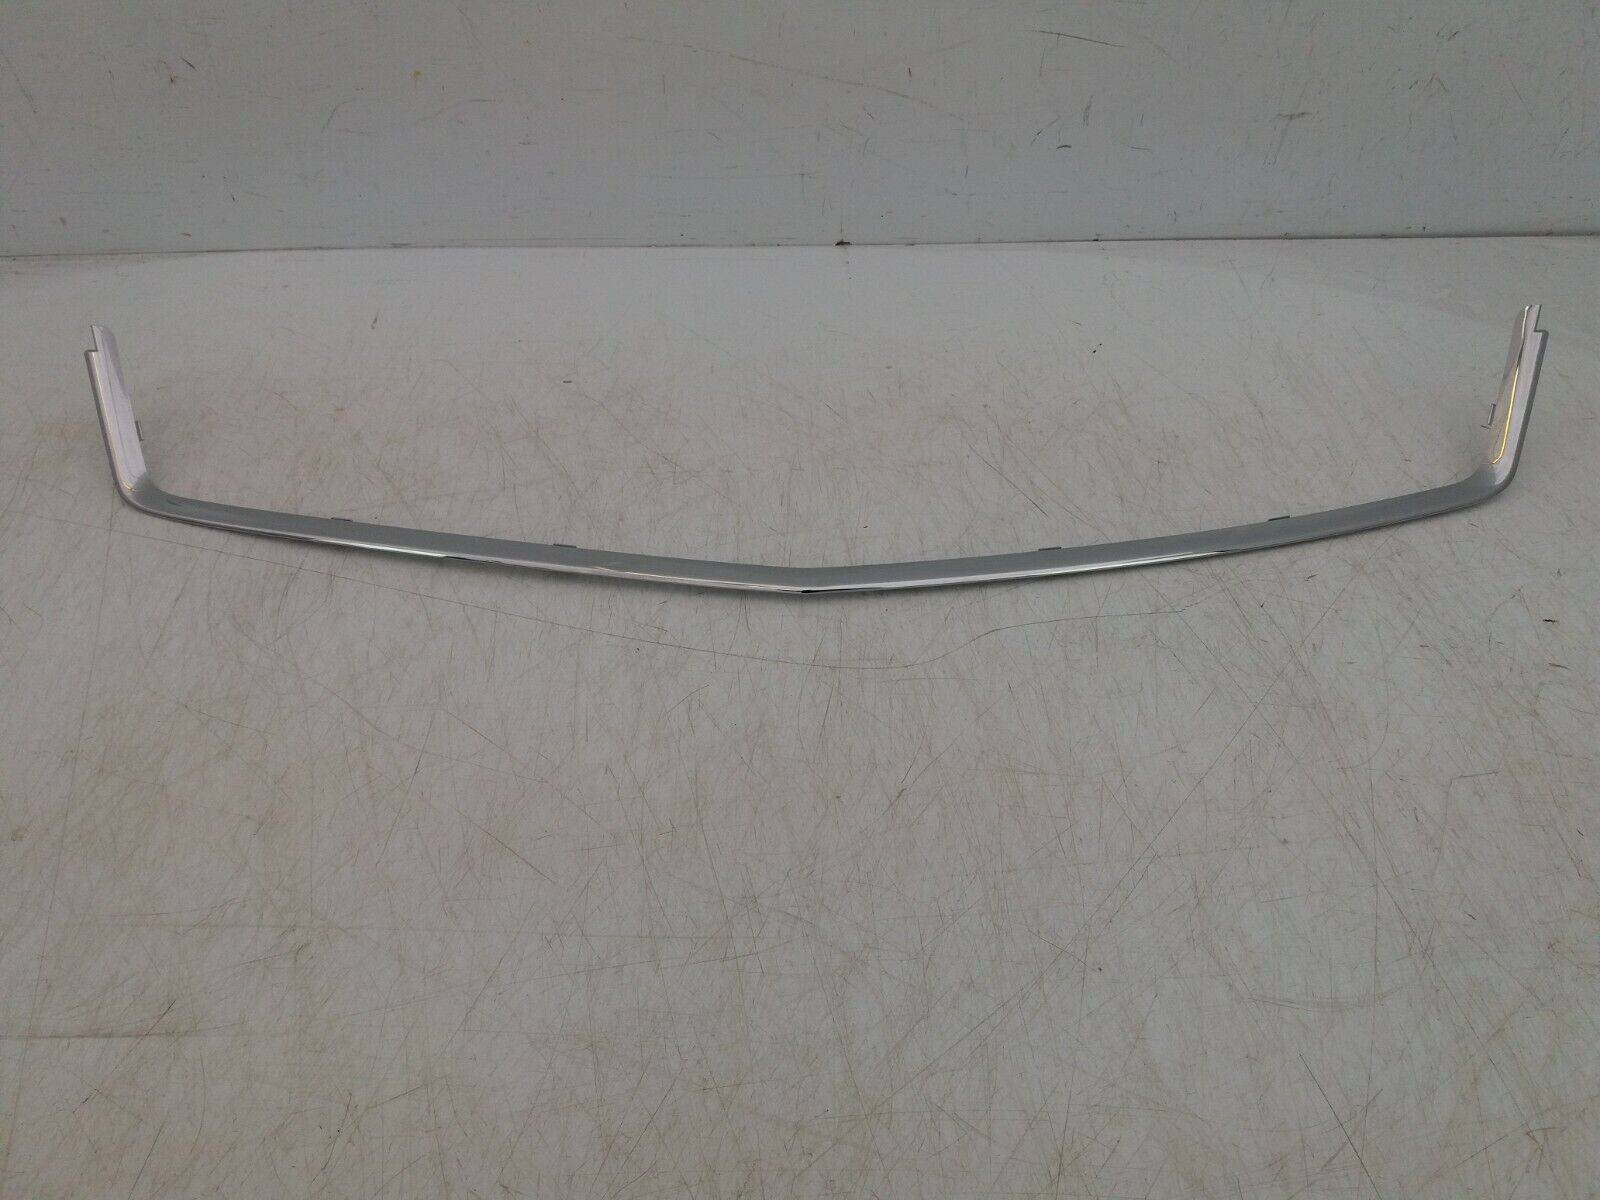 Vauxhall Astra H Front Bumper Lower Chrome 13225795 Genuine 175897457120